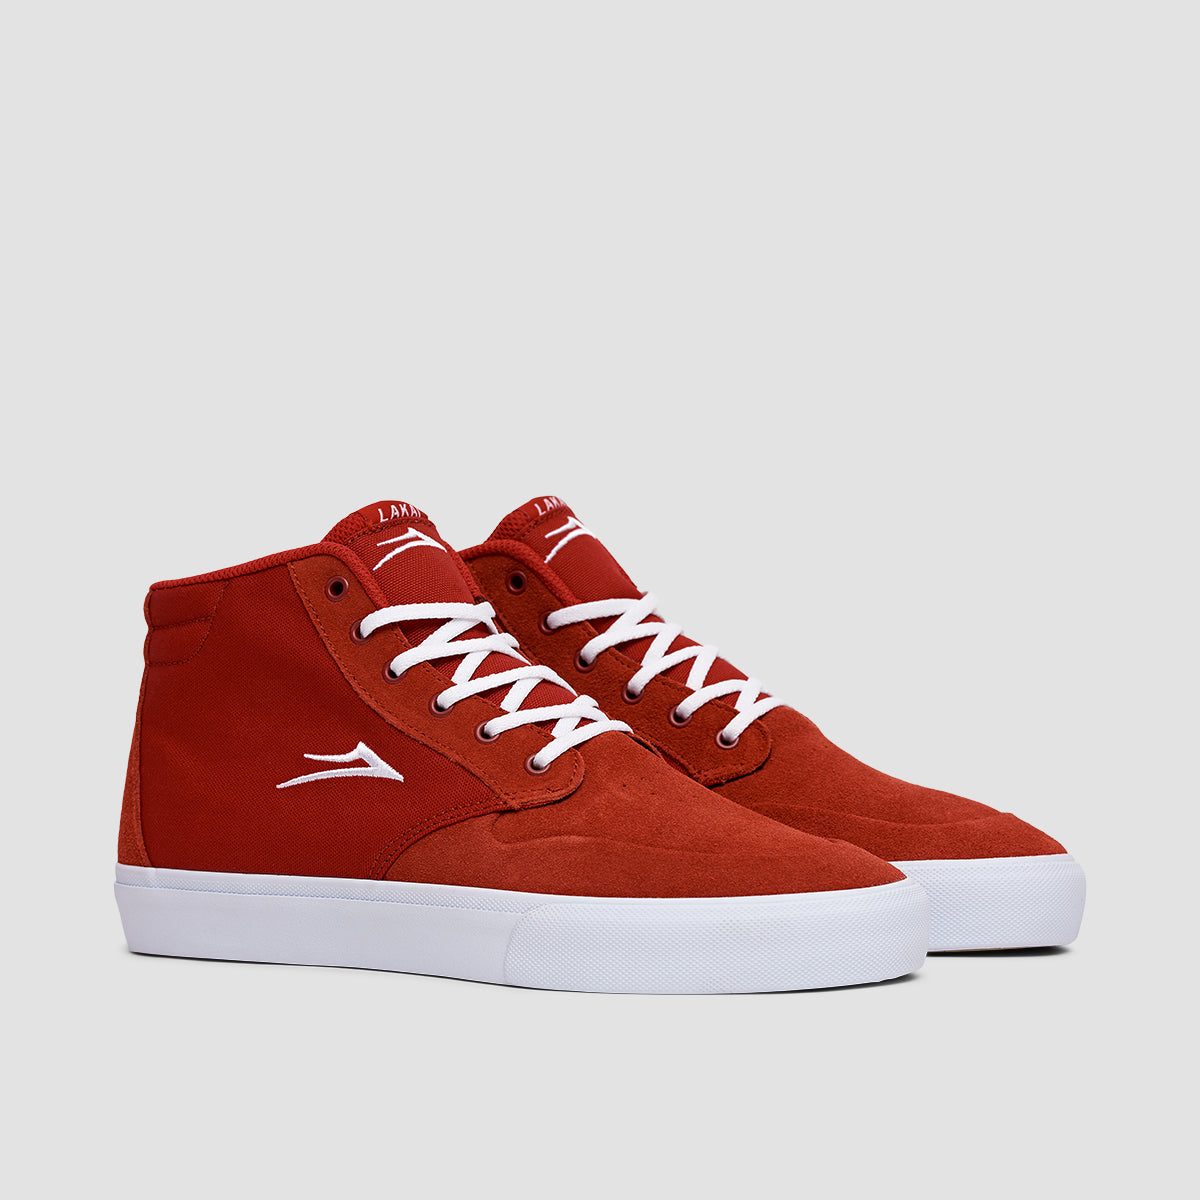 Lakai Riley 3 High Shoes - Red Suede